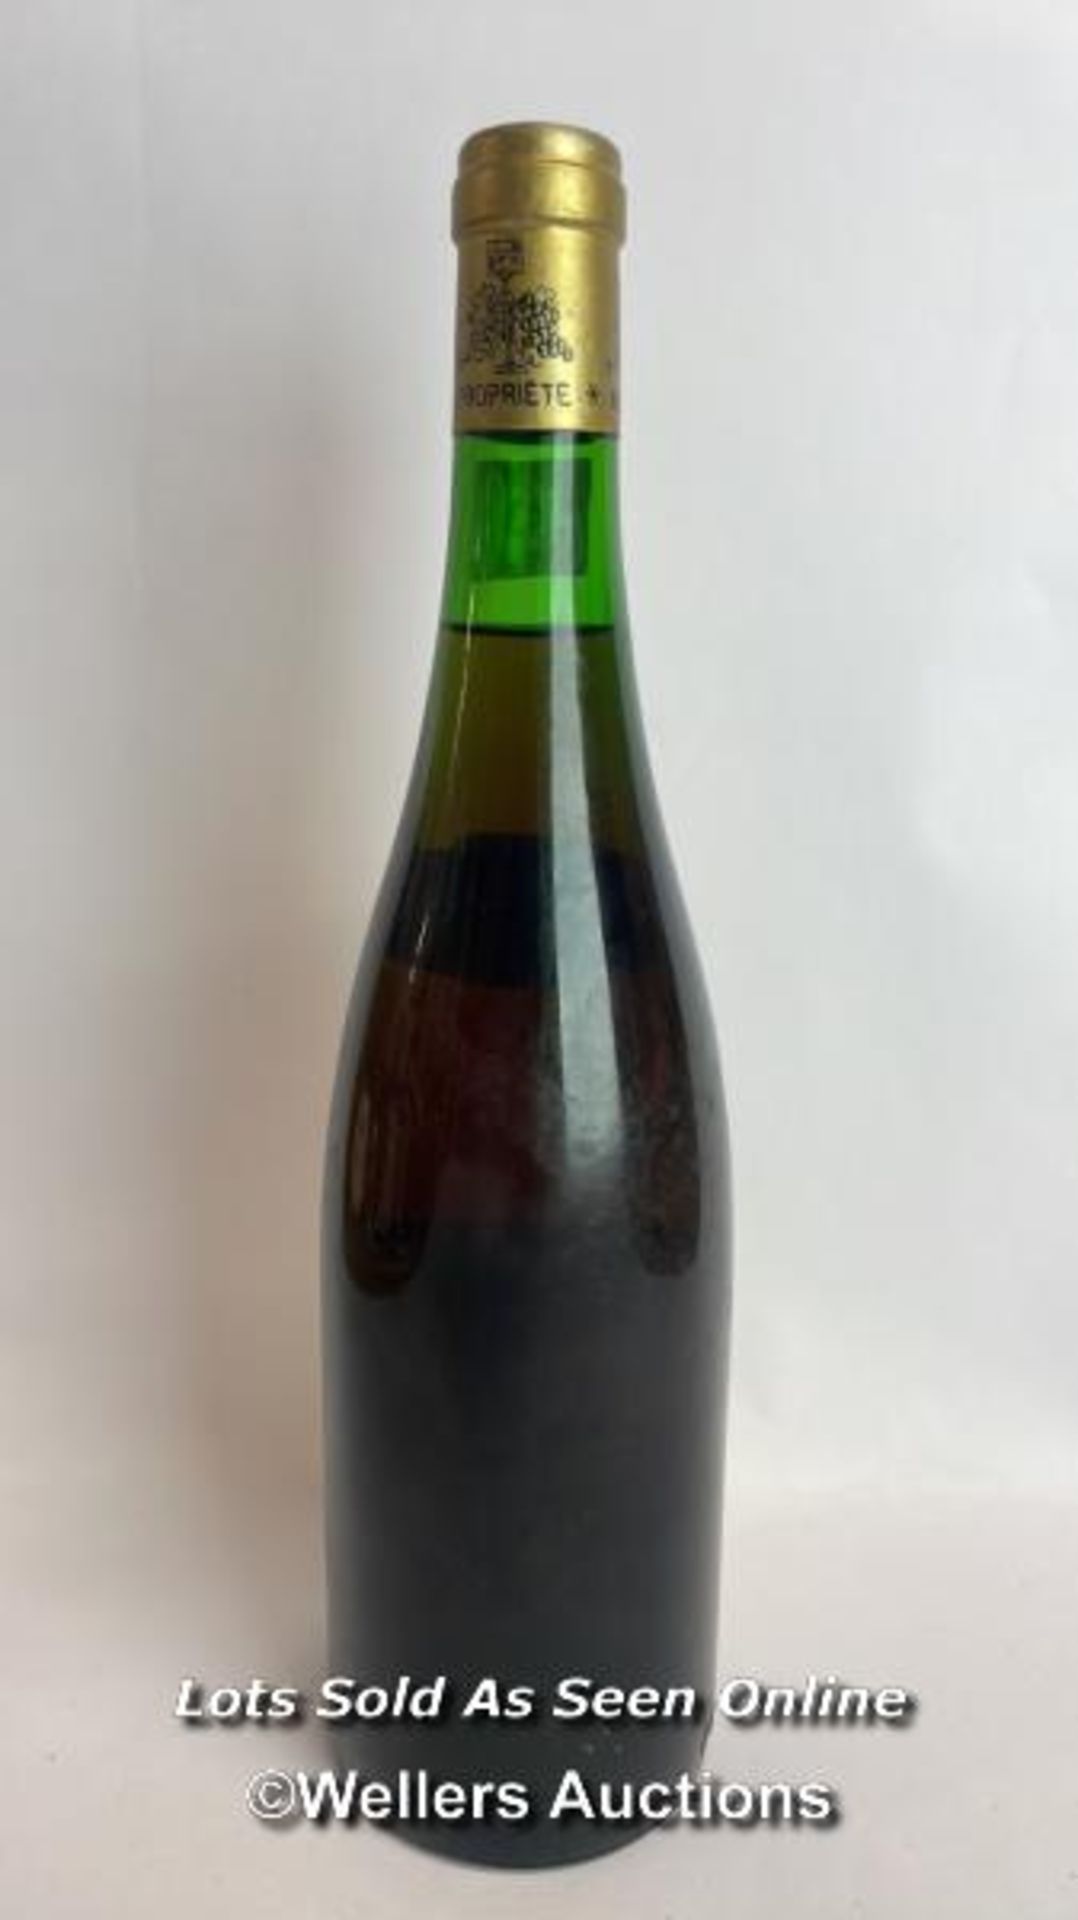 1974 Rose De Loire, 73cl, No vol indicated / Please see images for fill level and general condition. - Image 7 of 7